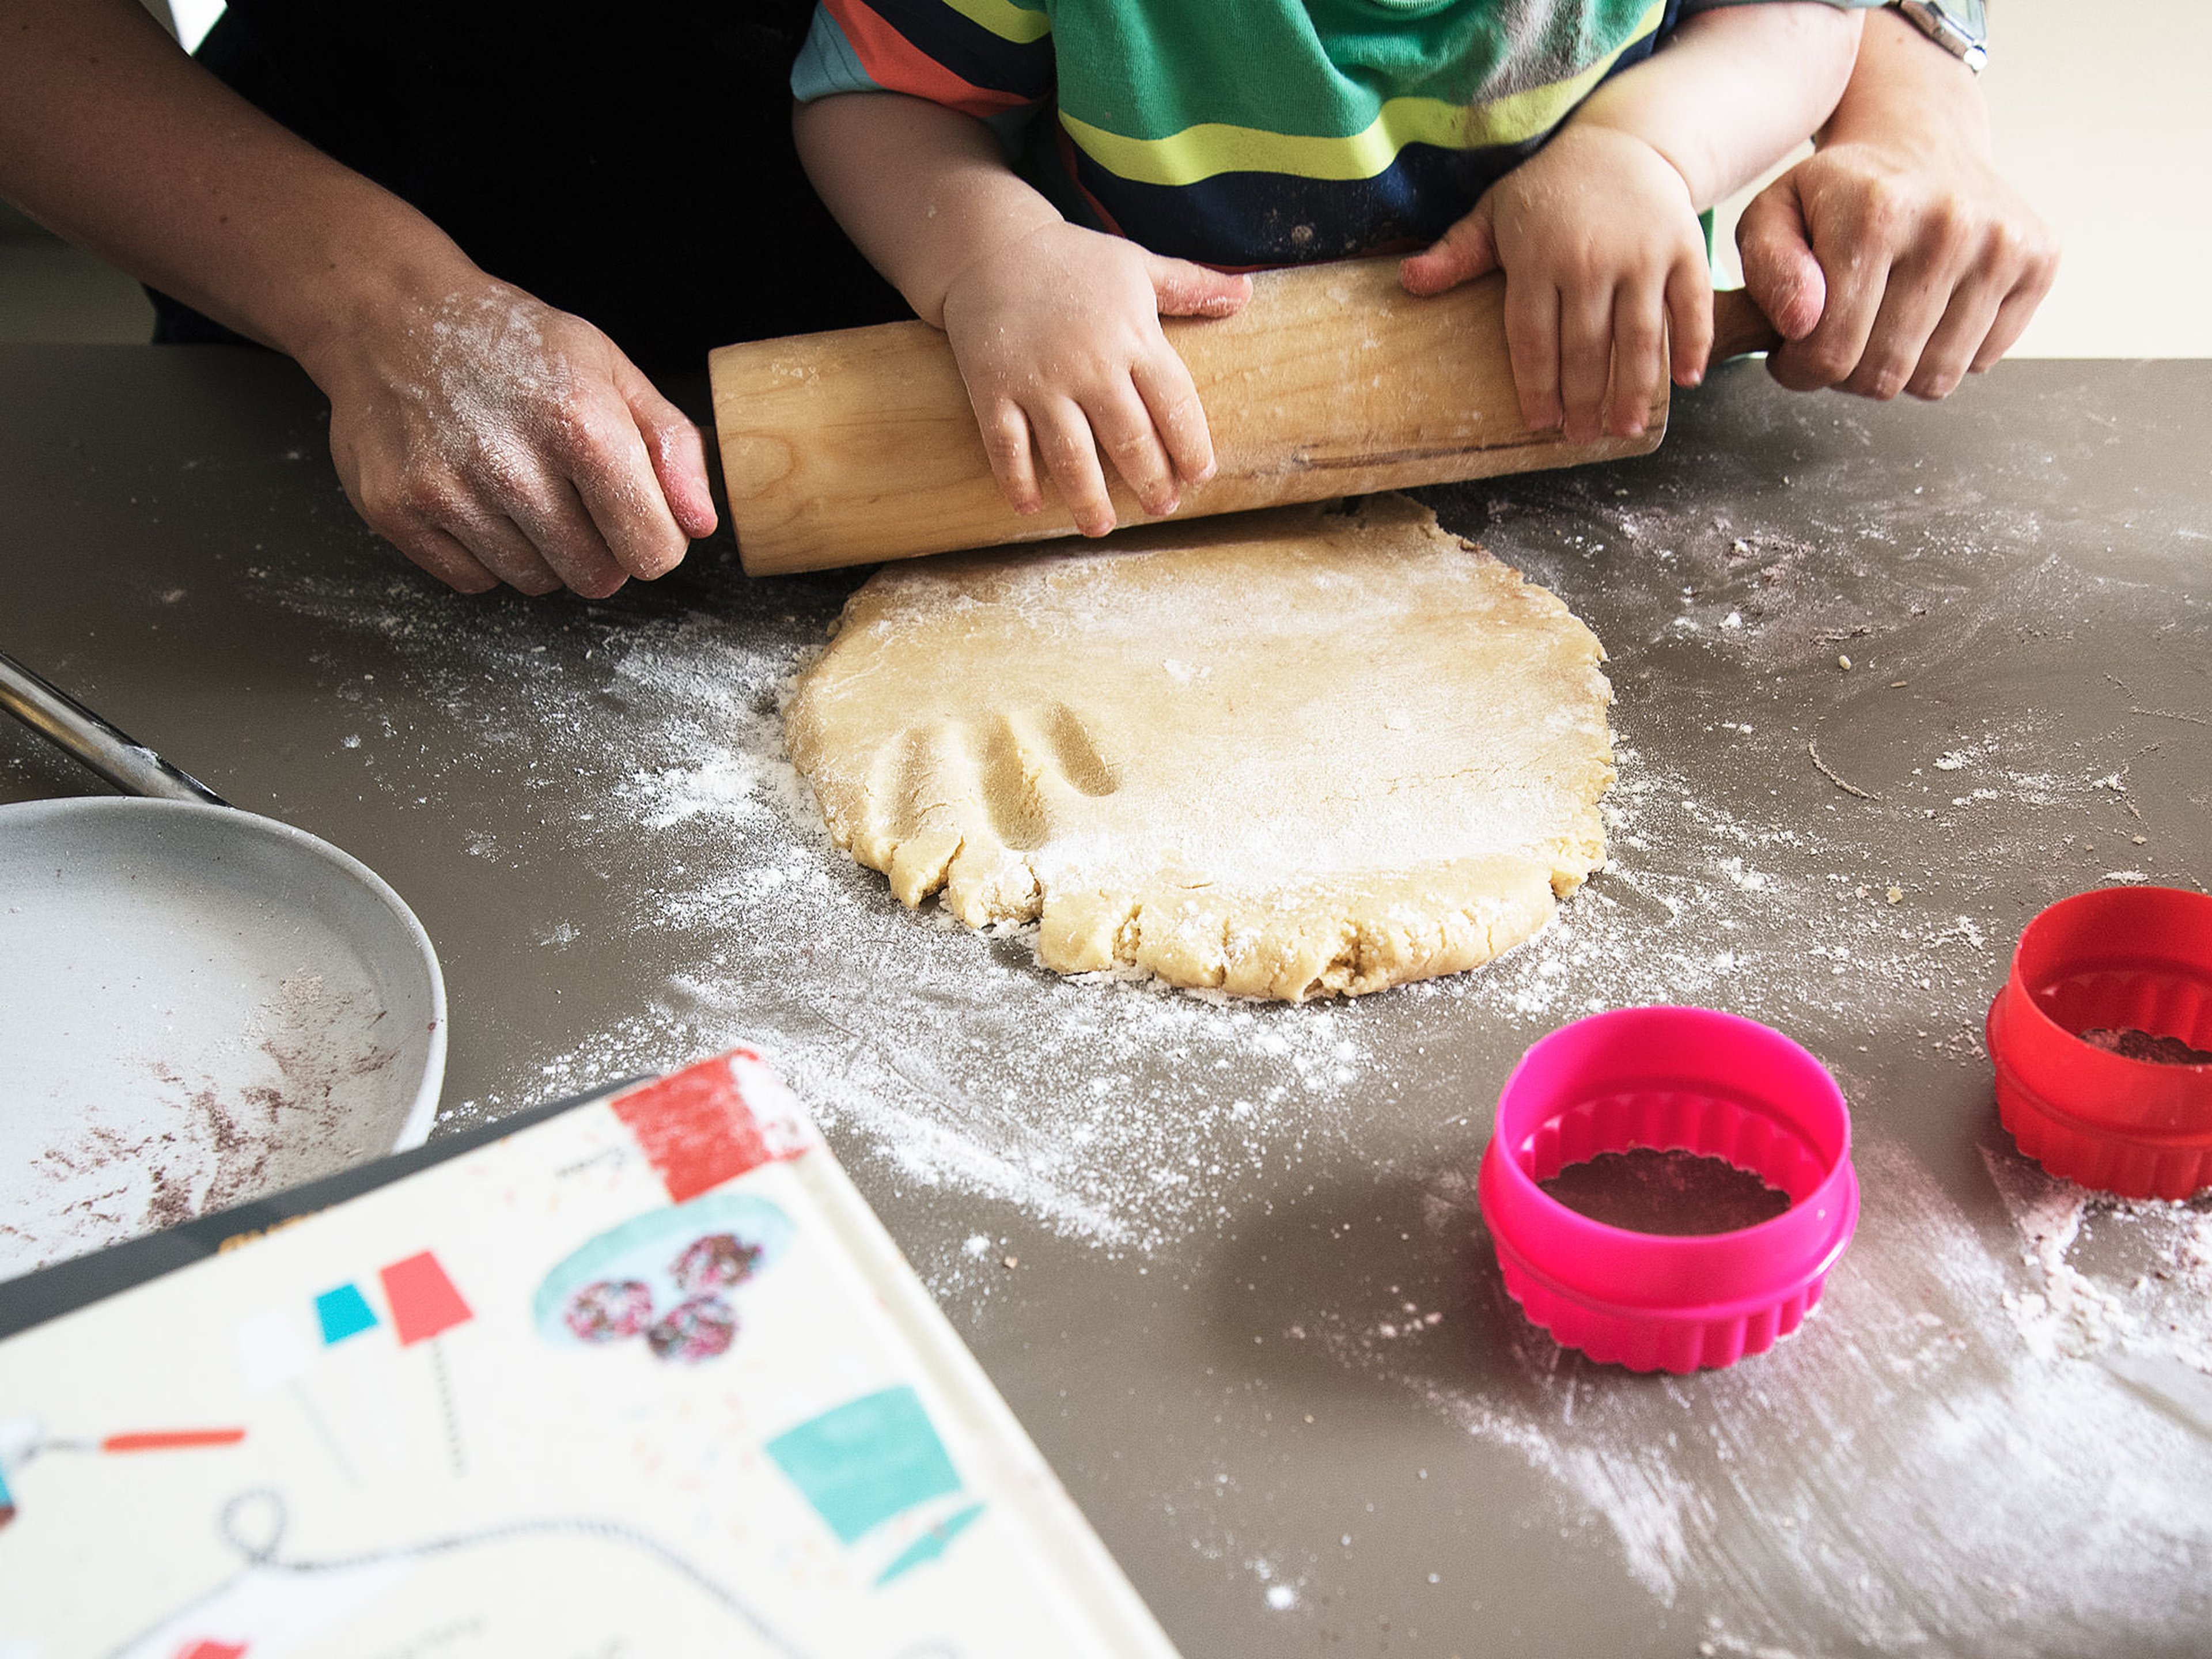 From Toddlers to Teenagers: 5 Great Cookbooks for Kids